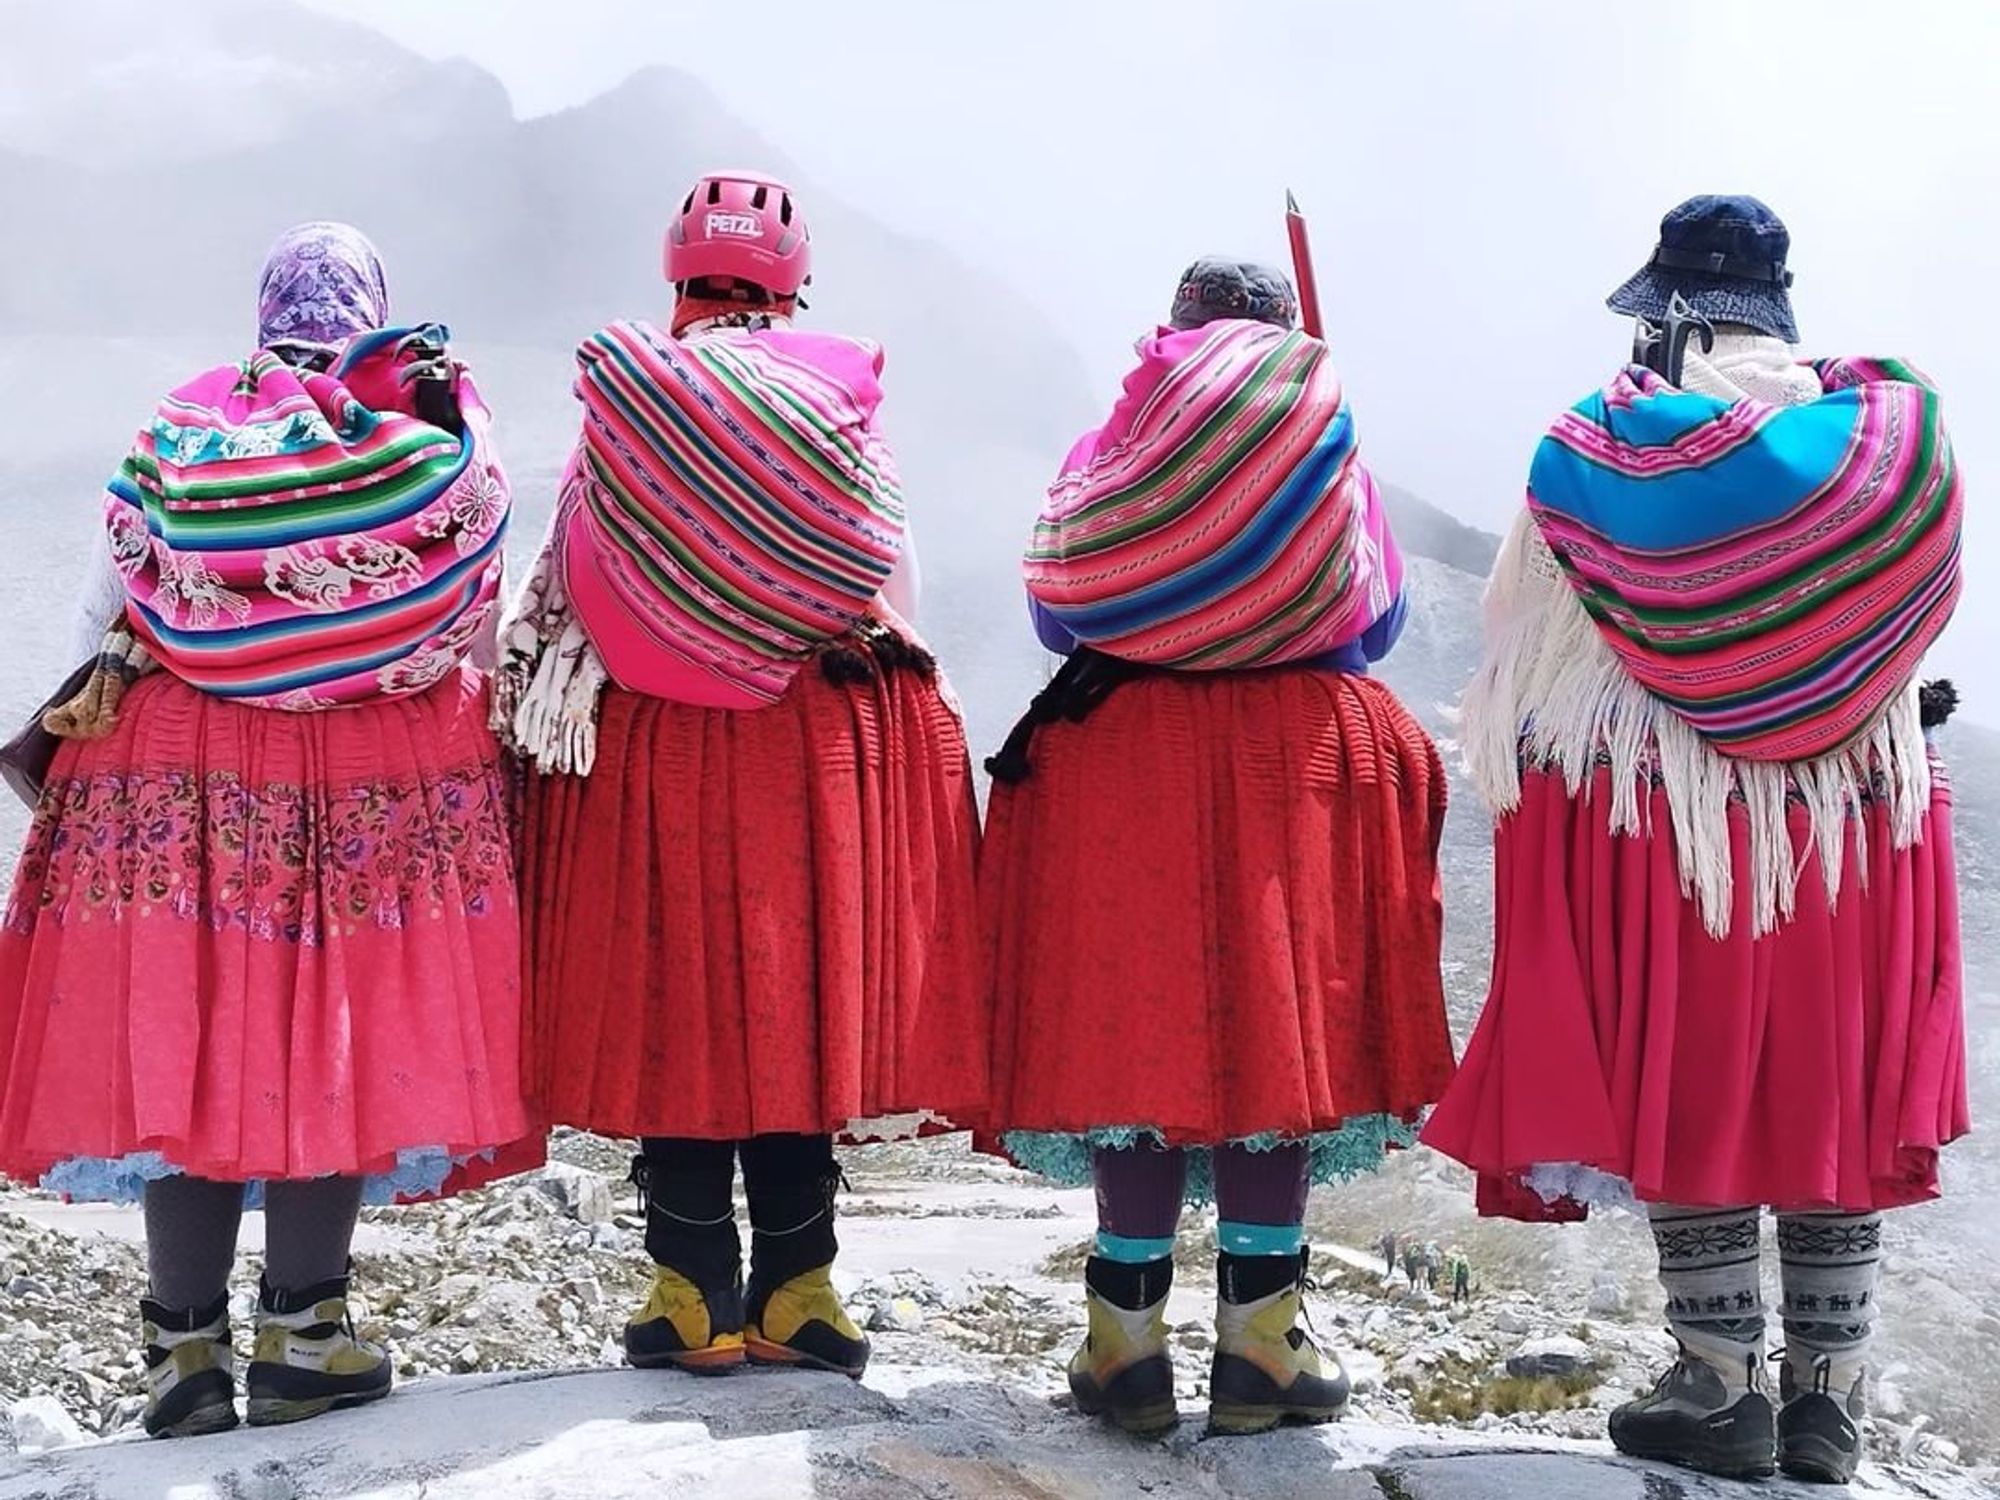 Four Bolivian cholitas, in traditional attire, admiring the mountain landscape during their climbing expedition.